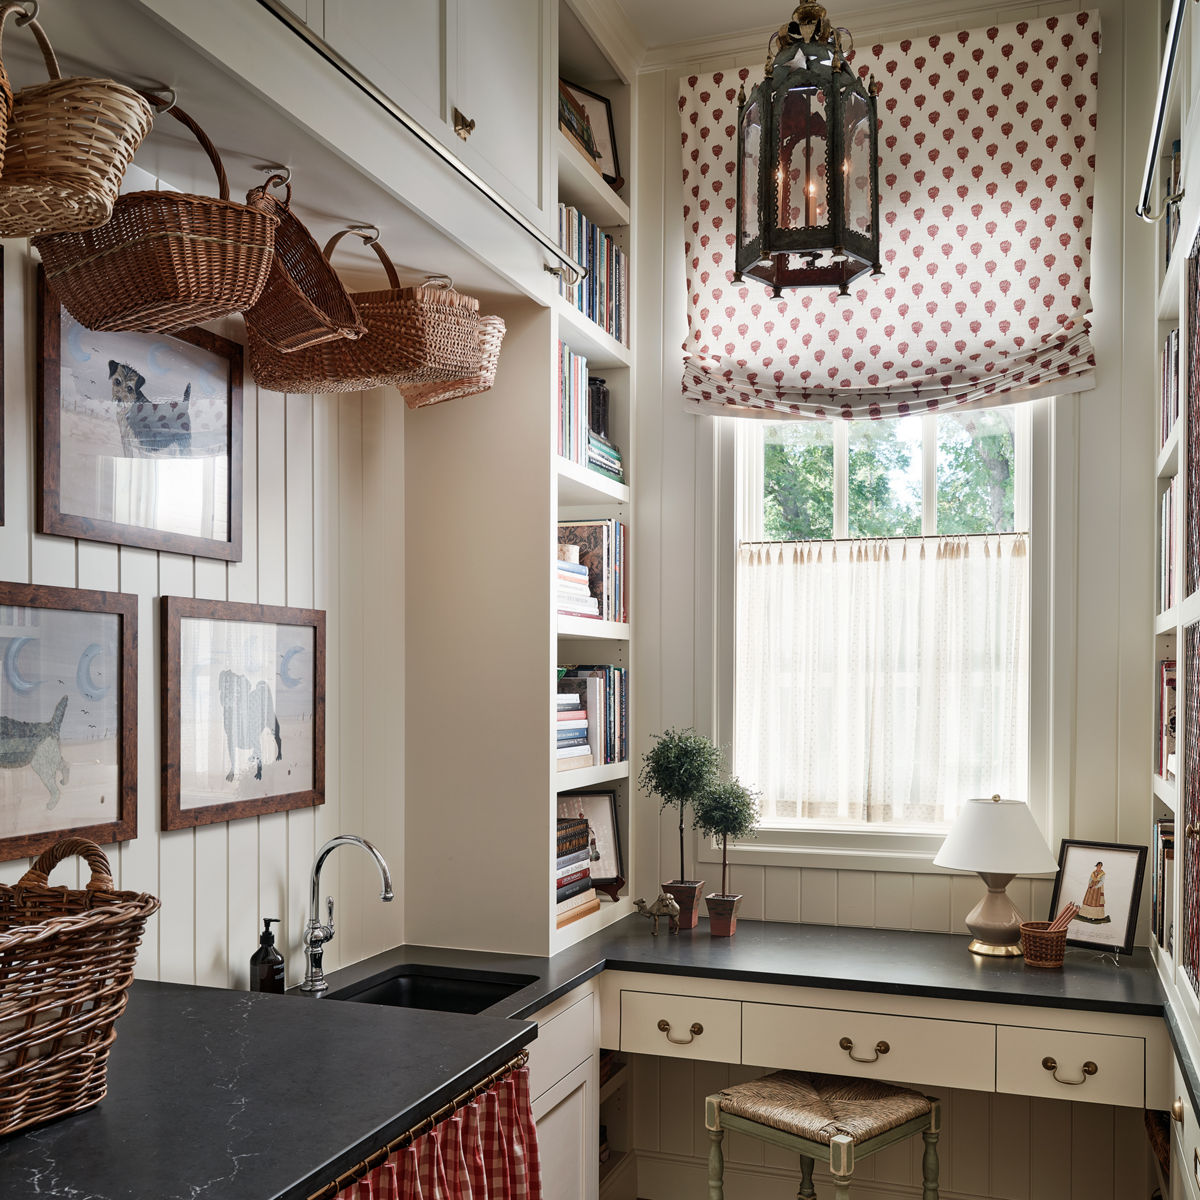 a laundry room with a utility sink, desk and stool, black quartz countertops, and vintage decor.